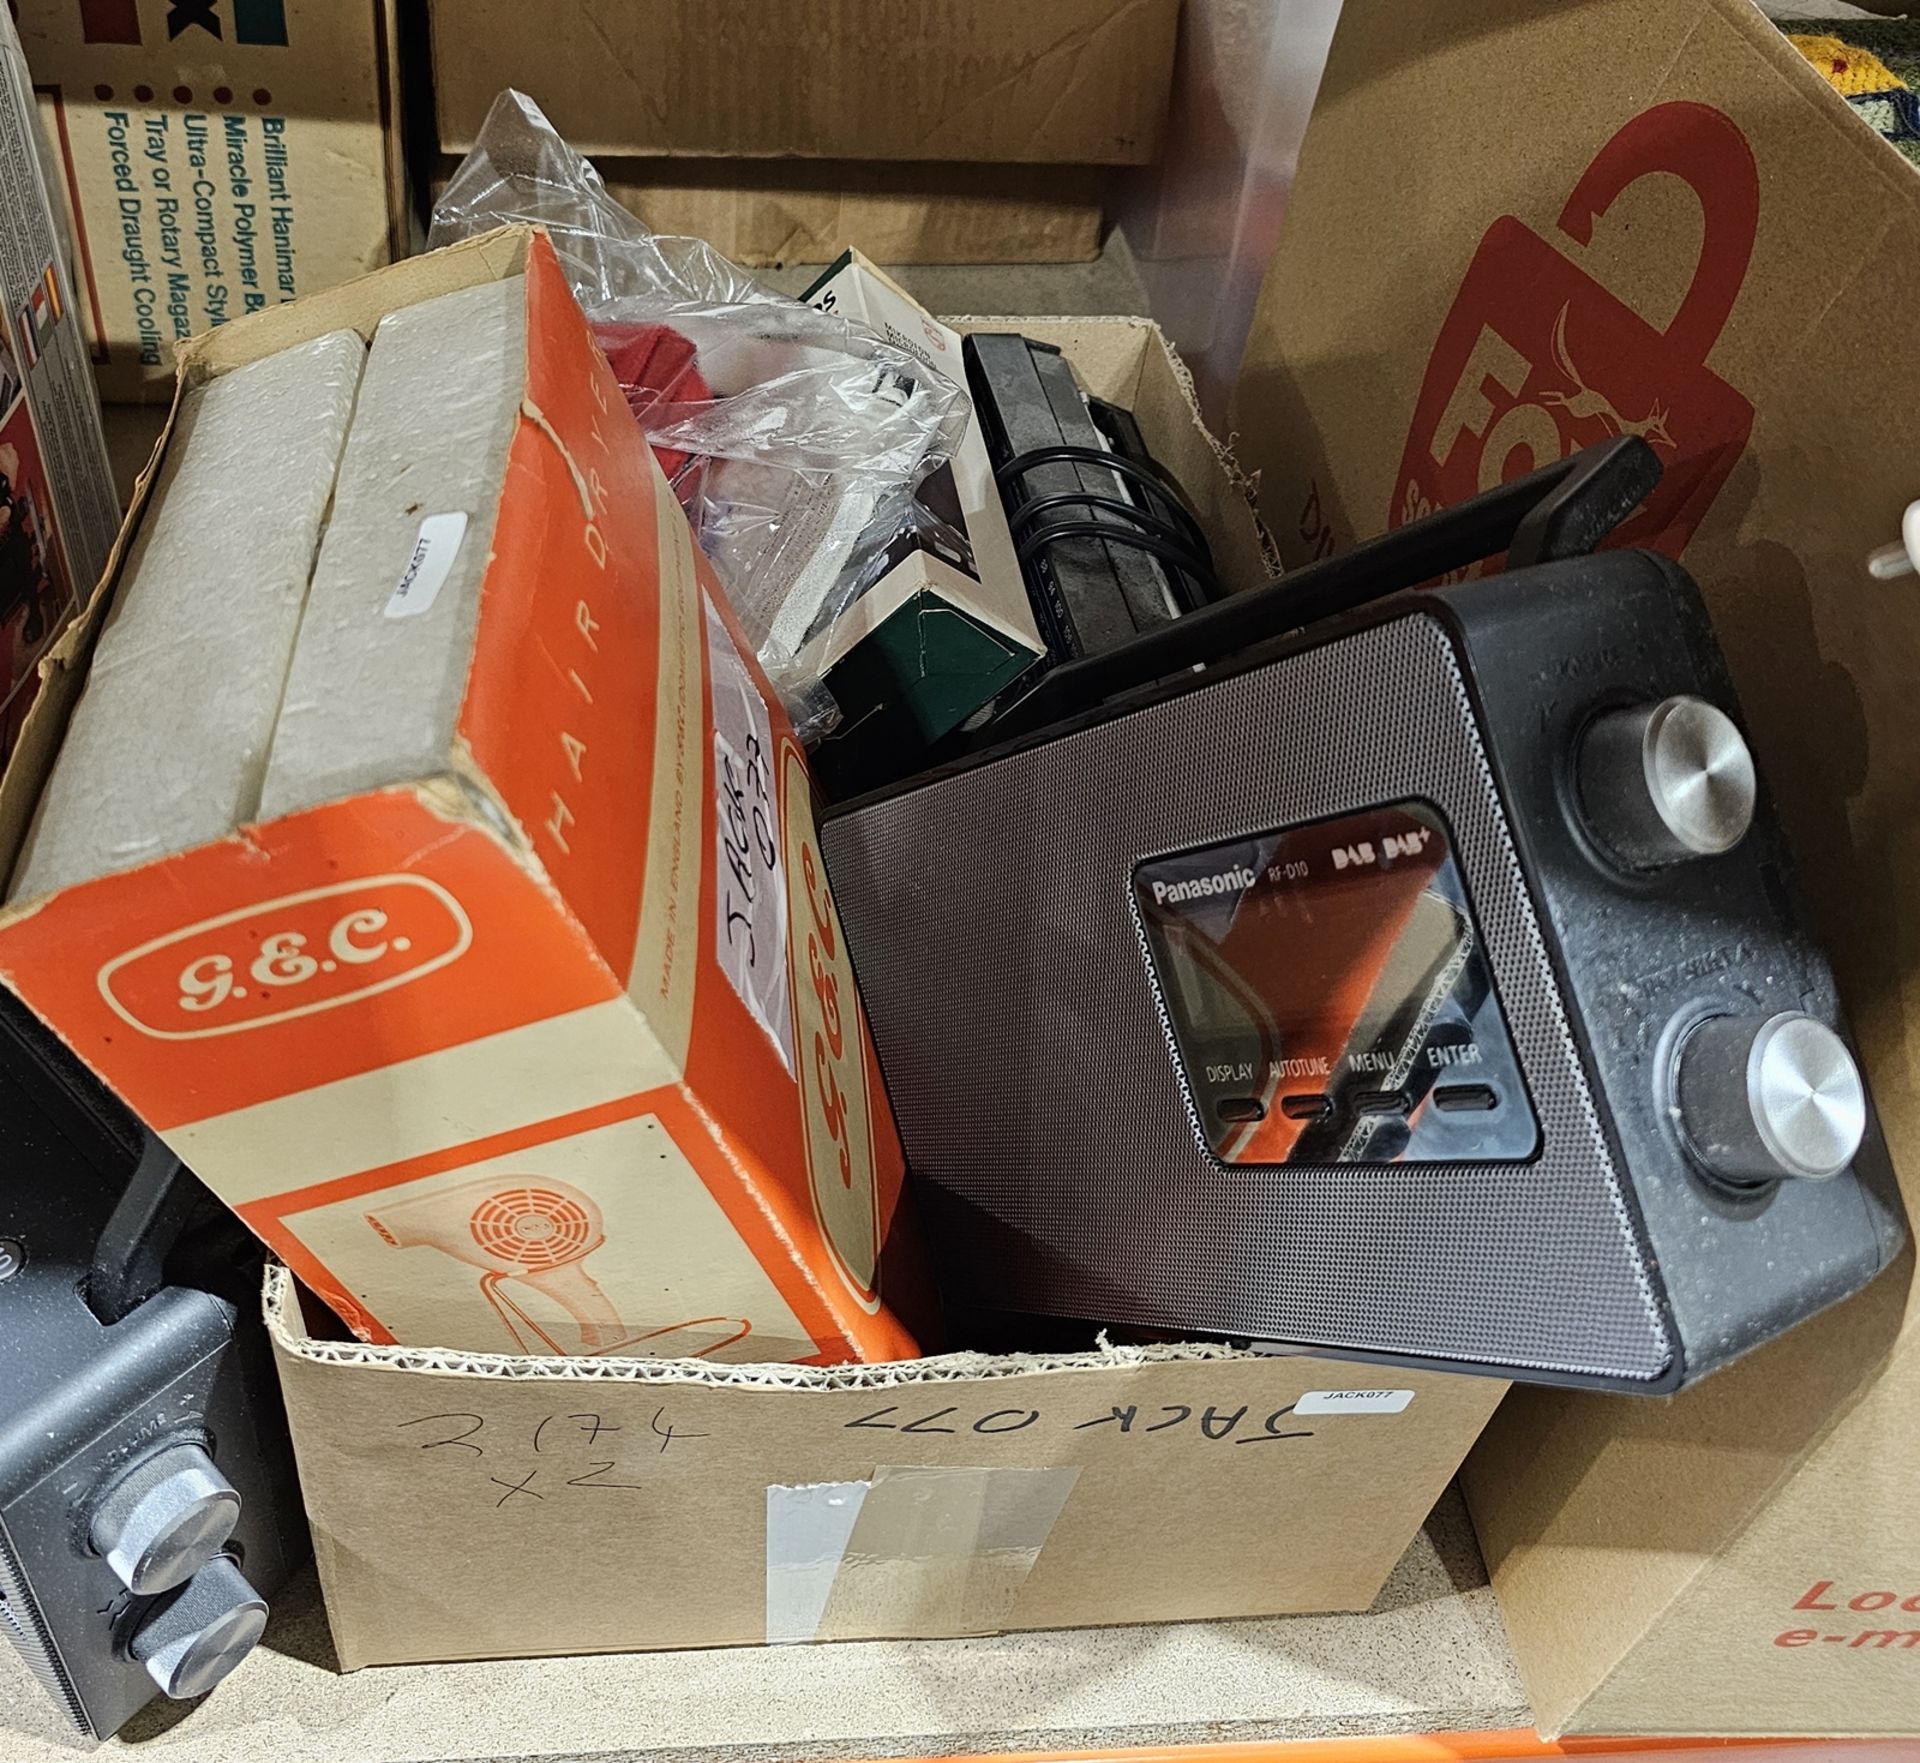 Black & Decker Woodworker BD66480W router in original box, a Panasonic DAB radio, a GHC hair dryer - Image 2 of 2